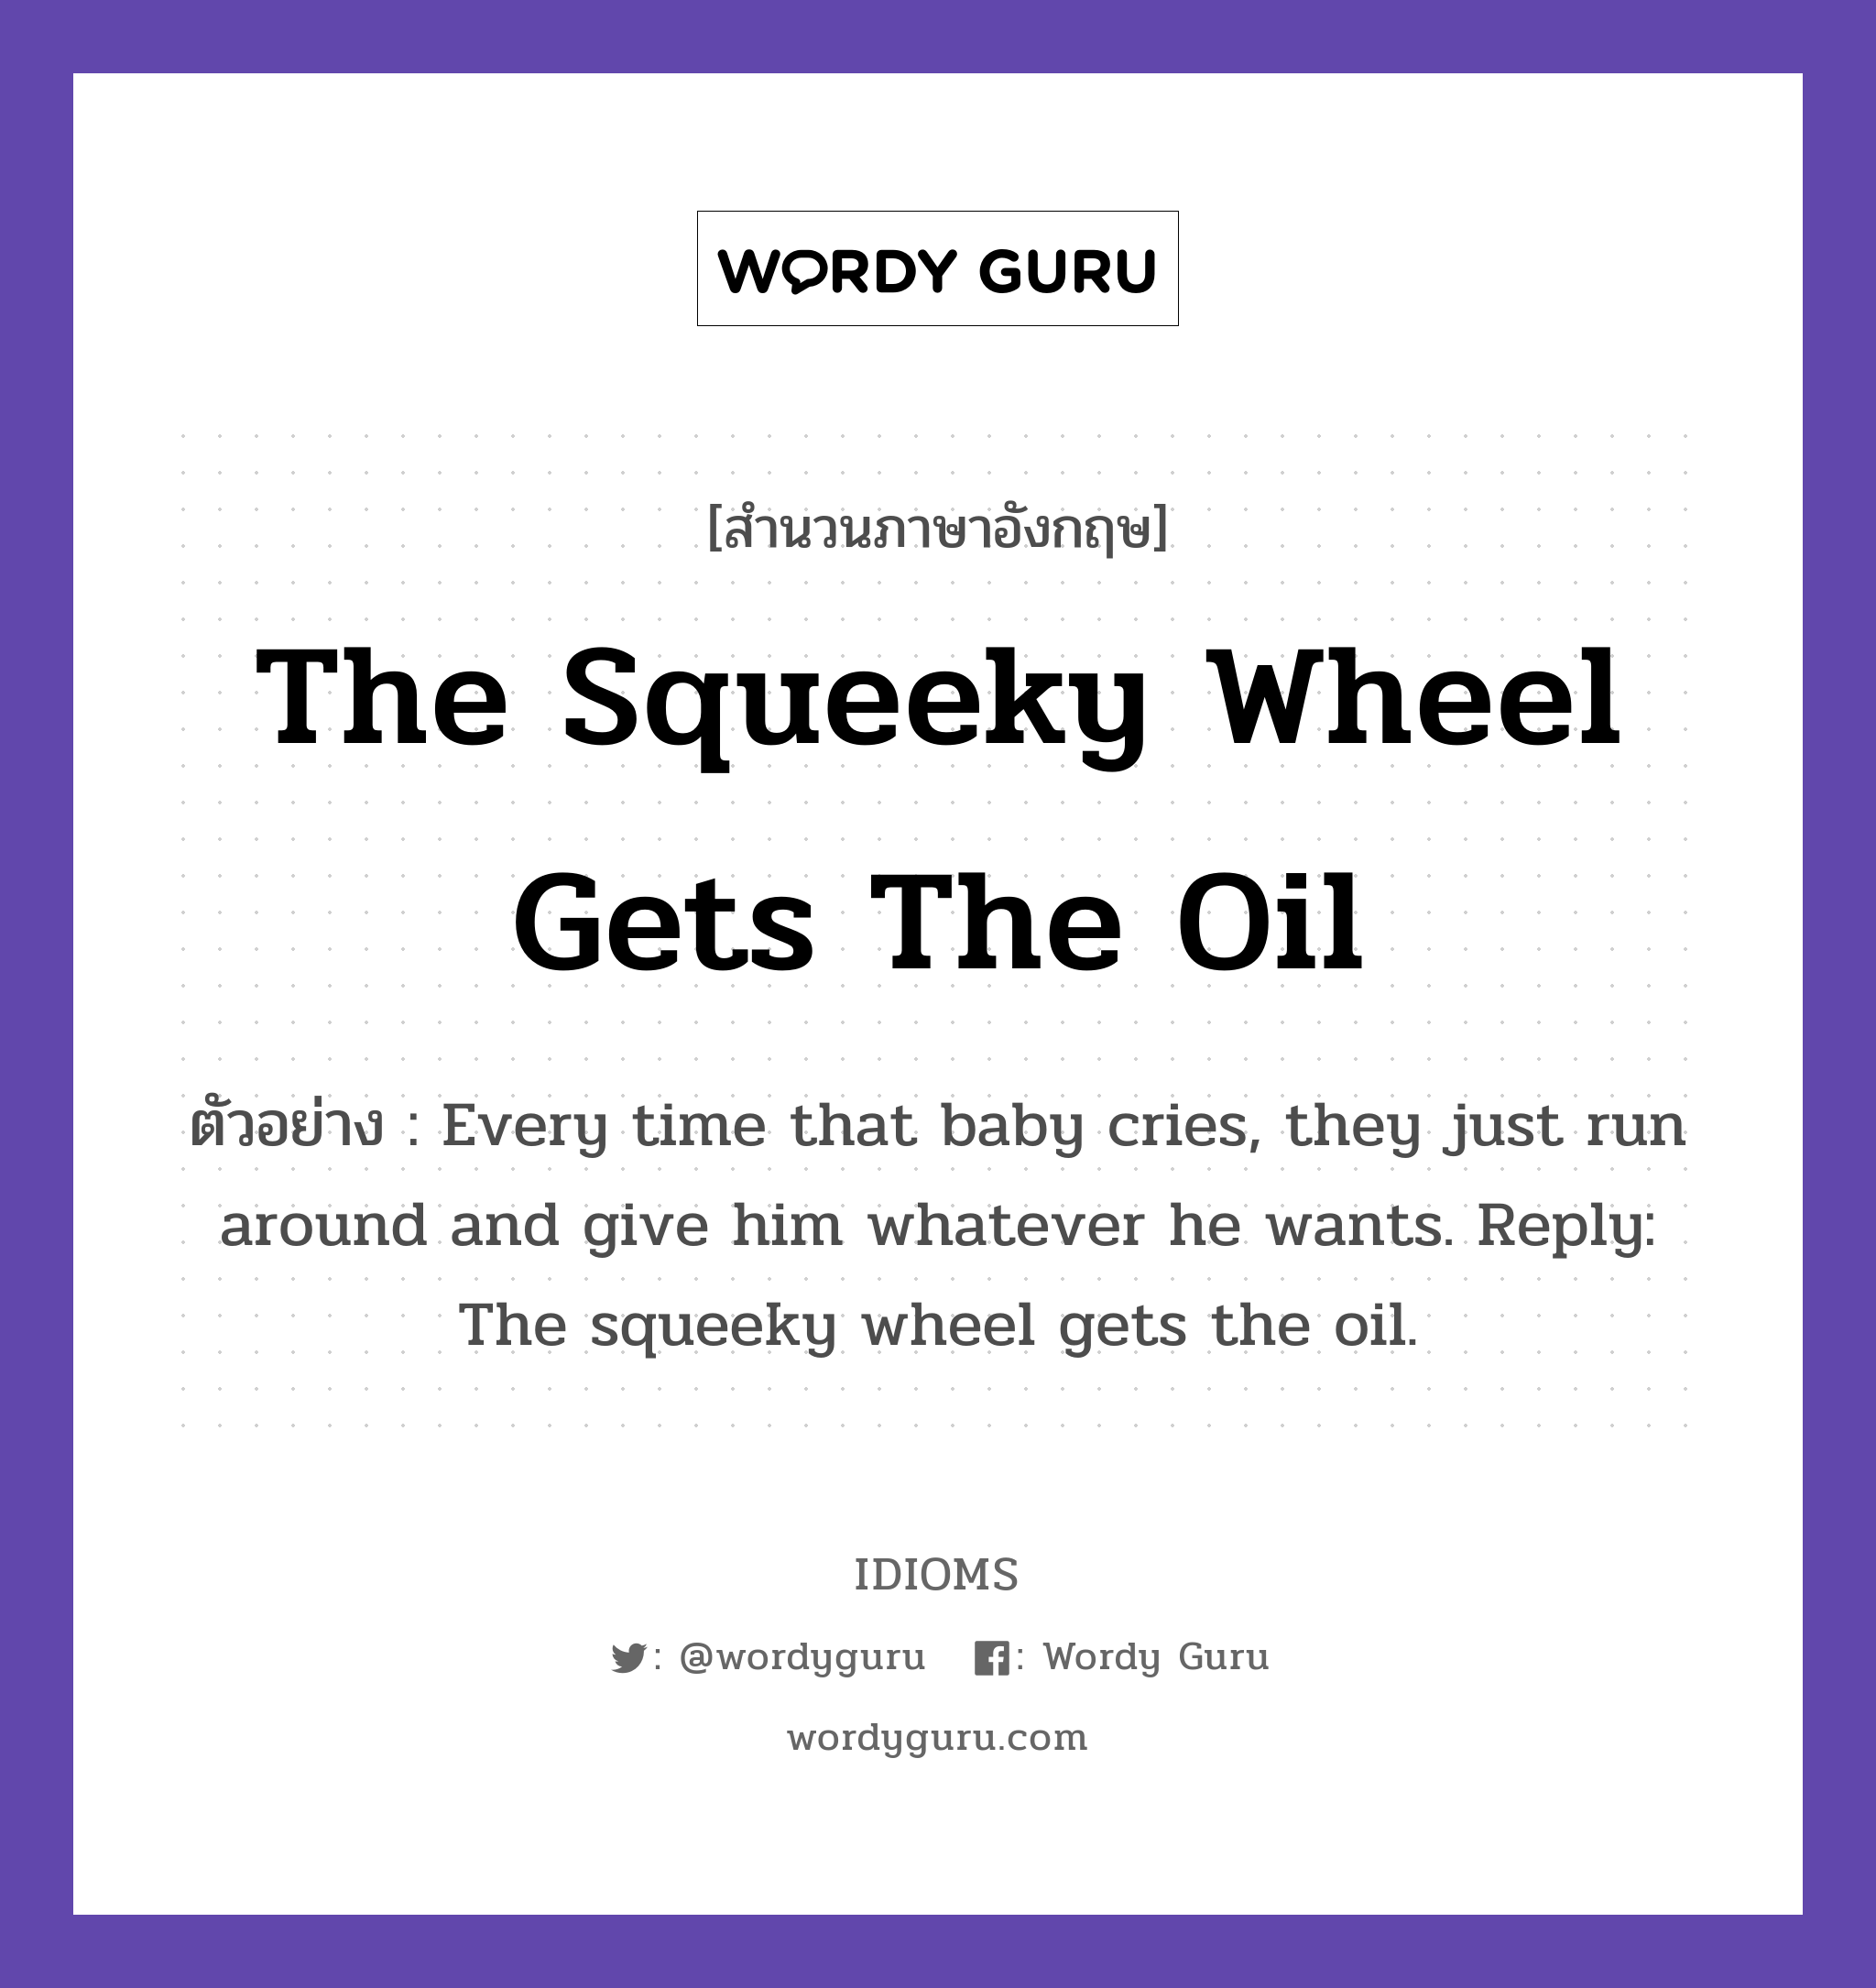 The Squeeky Wheel Gets The Oil แปลว่า?, สำนวนภาษาอังกฤษ The Squeeky Wheel Gets The Oil ตัวอย่าง Every time that baby cries, they just run around and give him whatever he wants. Reply: The squeeky wheel gets the oil.